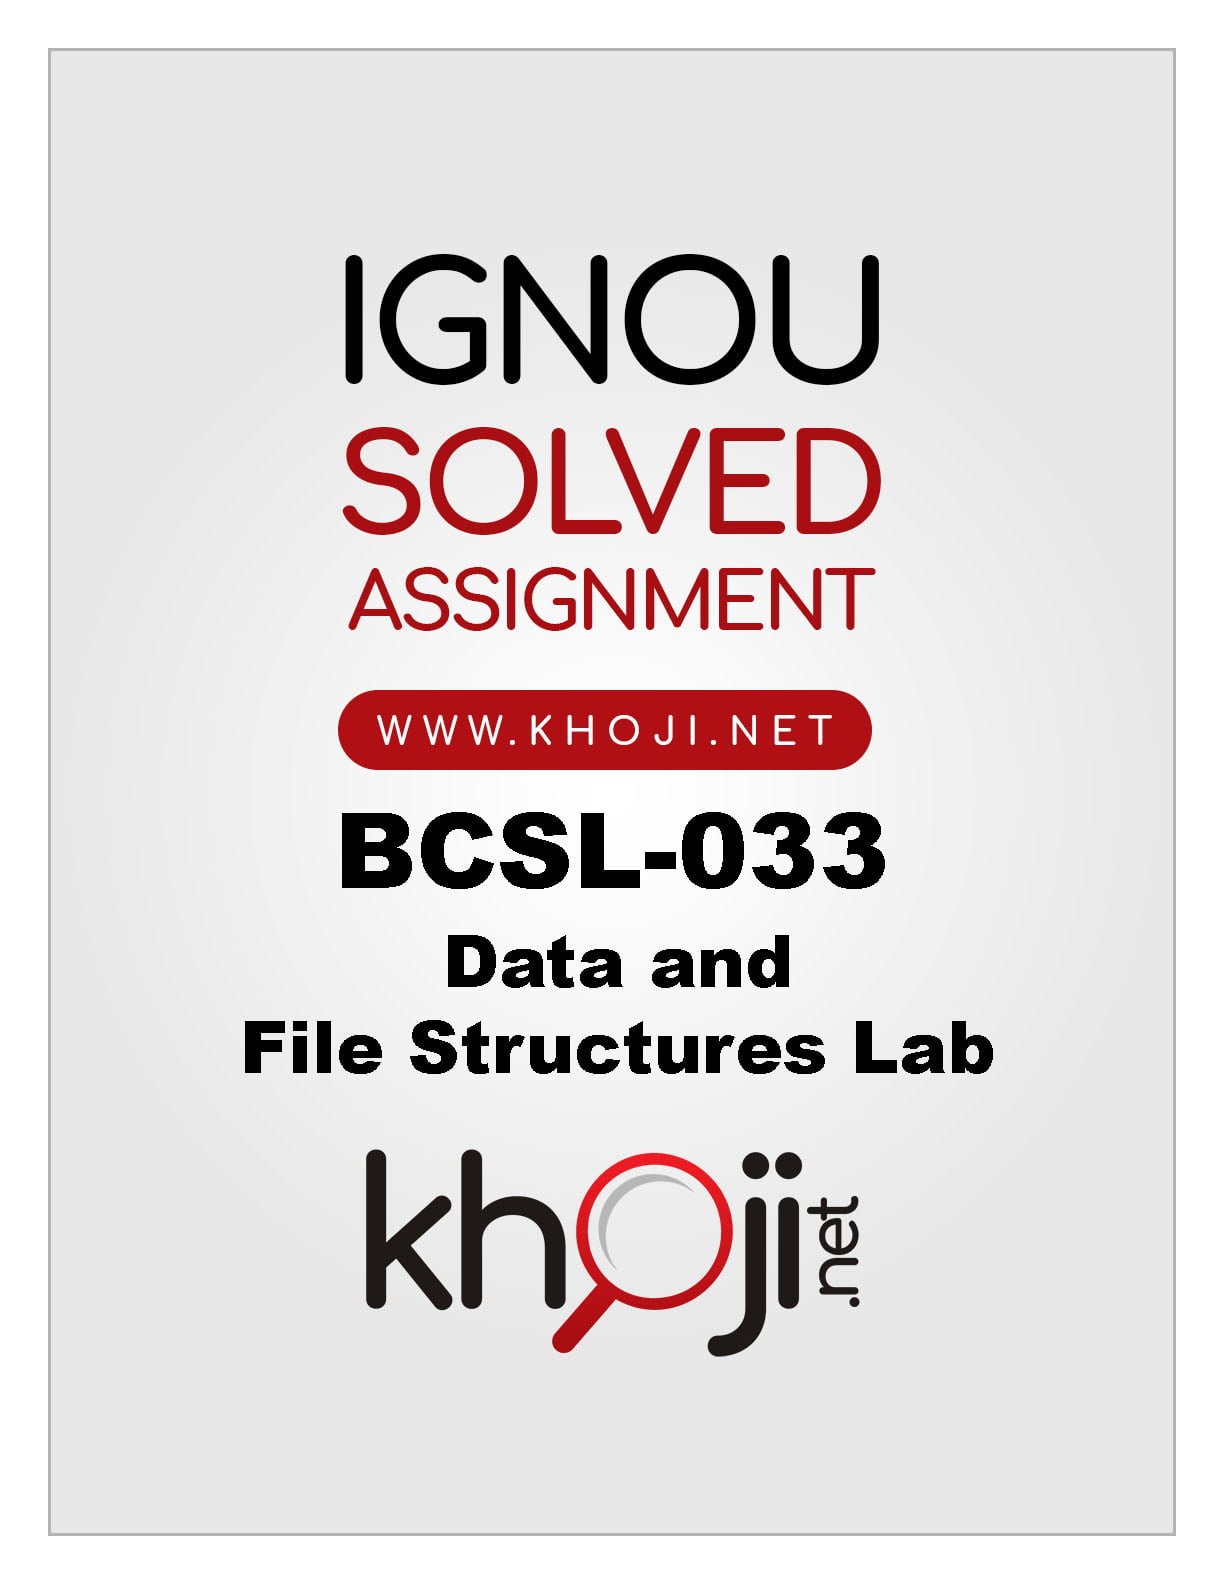 https://shop.khoji.net/wp-content/uploads/2019/08/BCSL-033-Solved-Assignment-Data-and-File-Structures-Lab.jpg